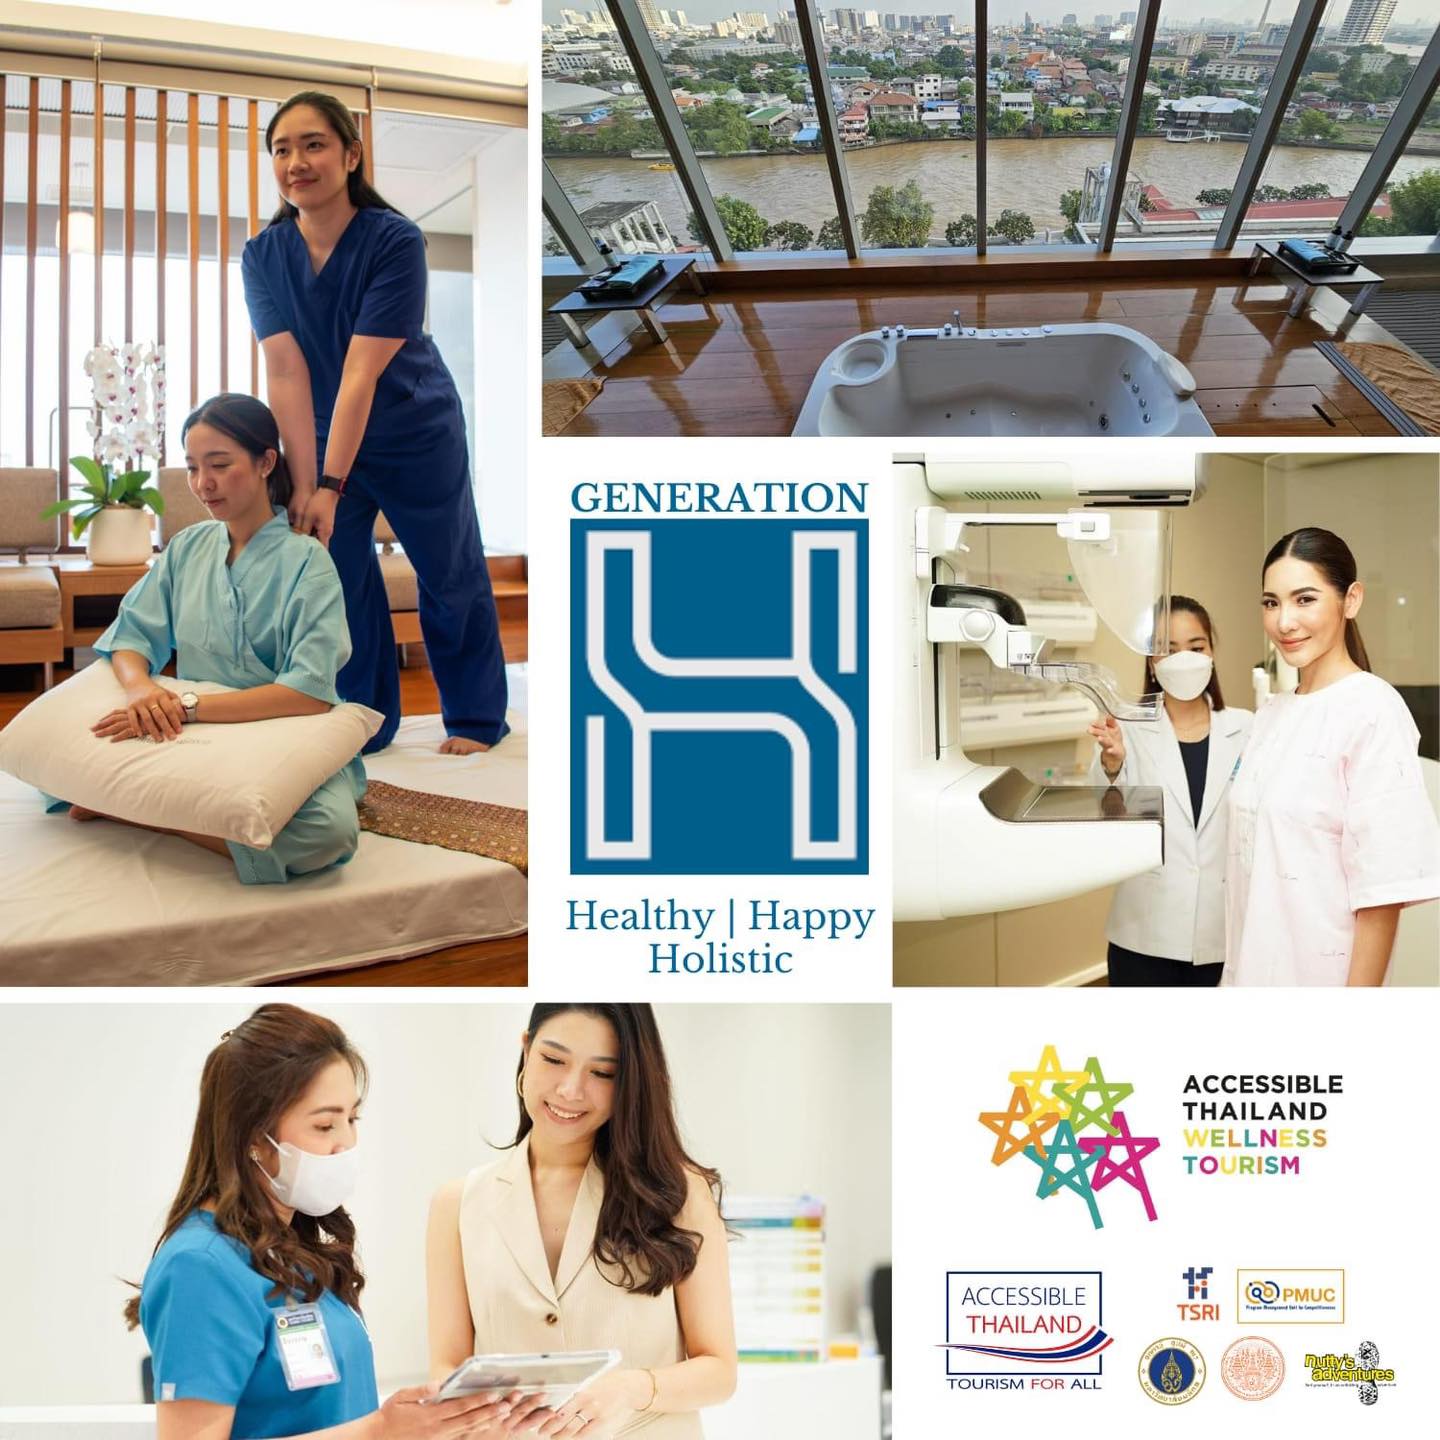 Accessible Thailand with Generation H